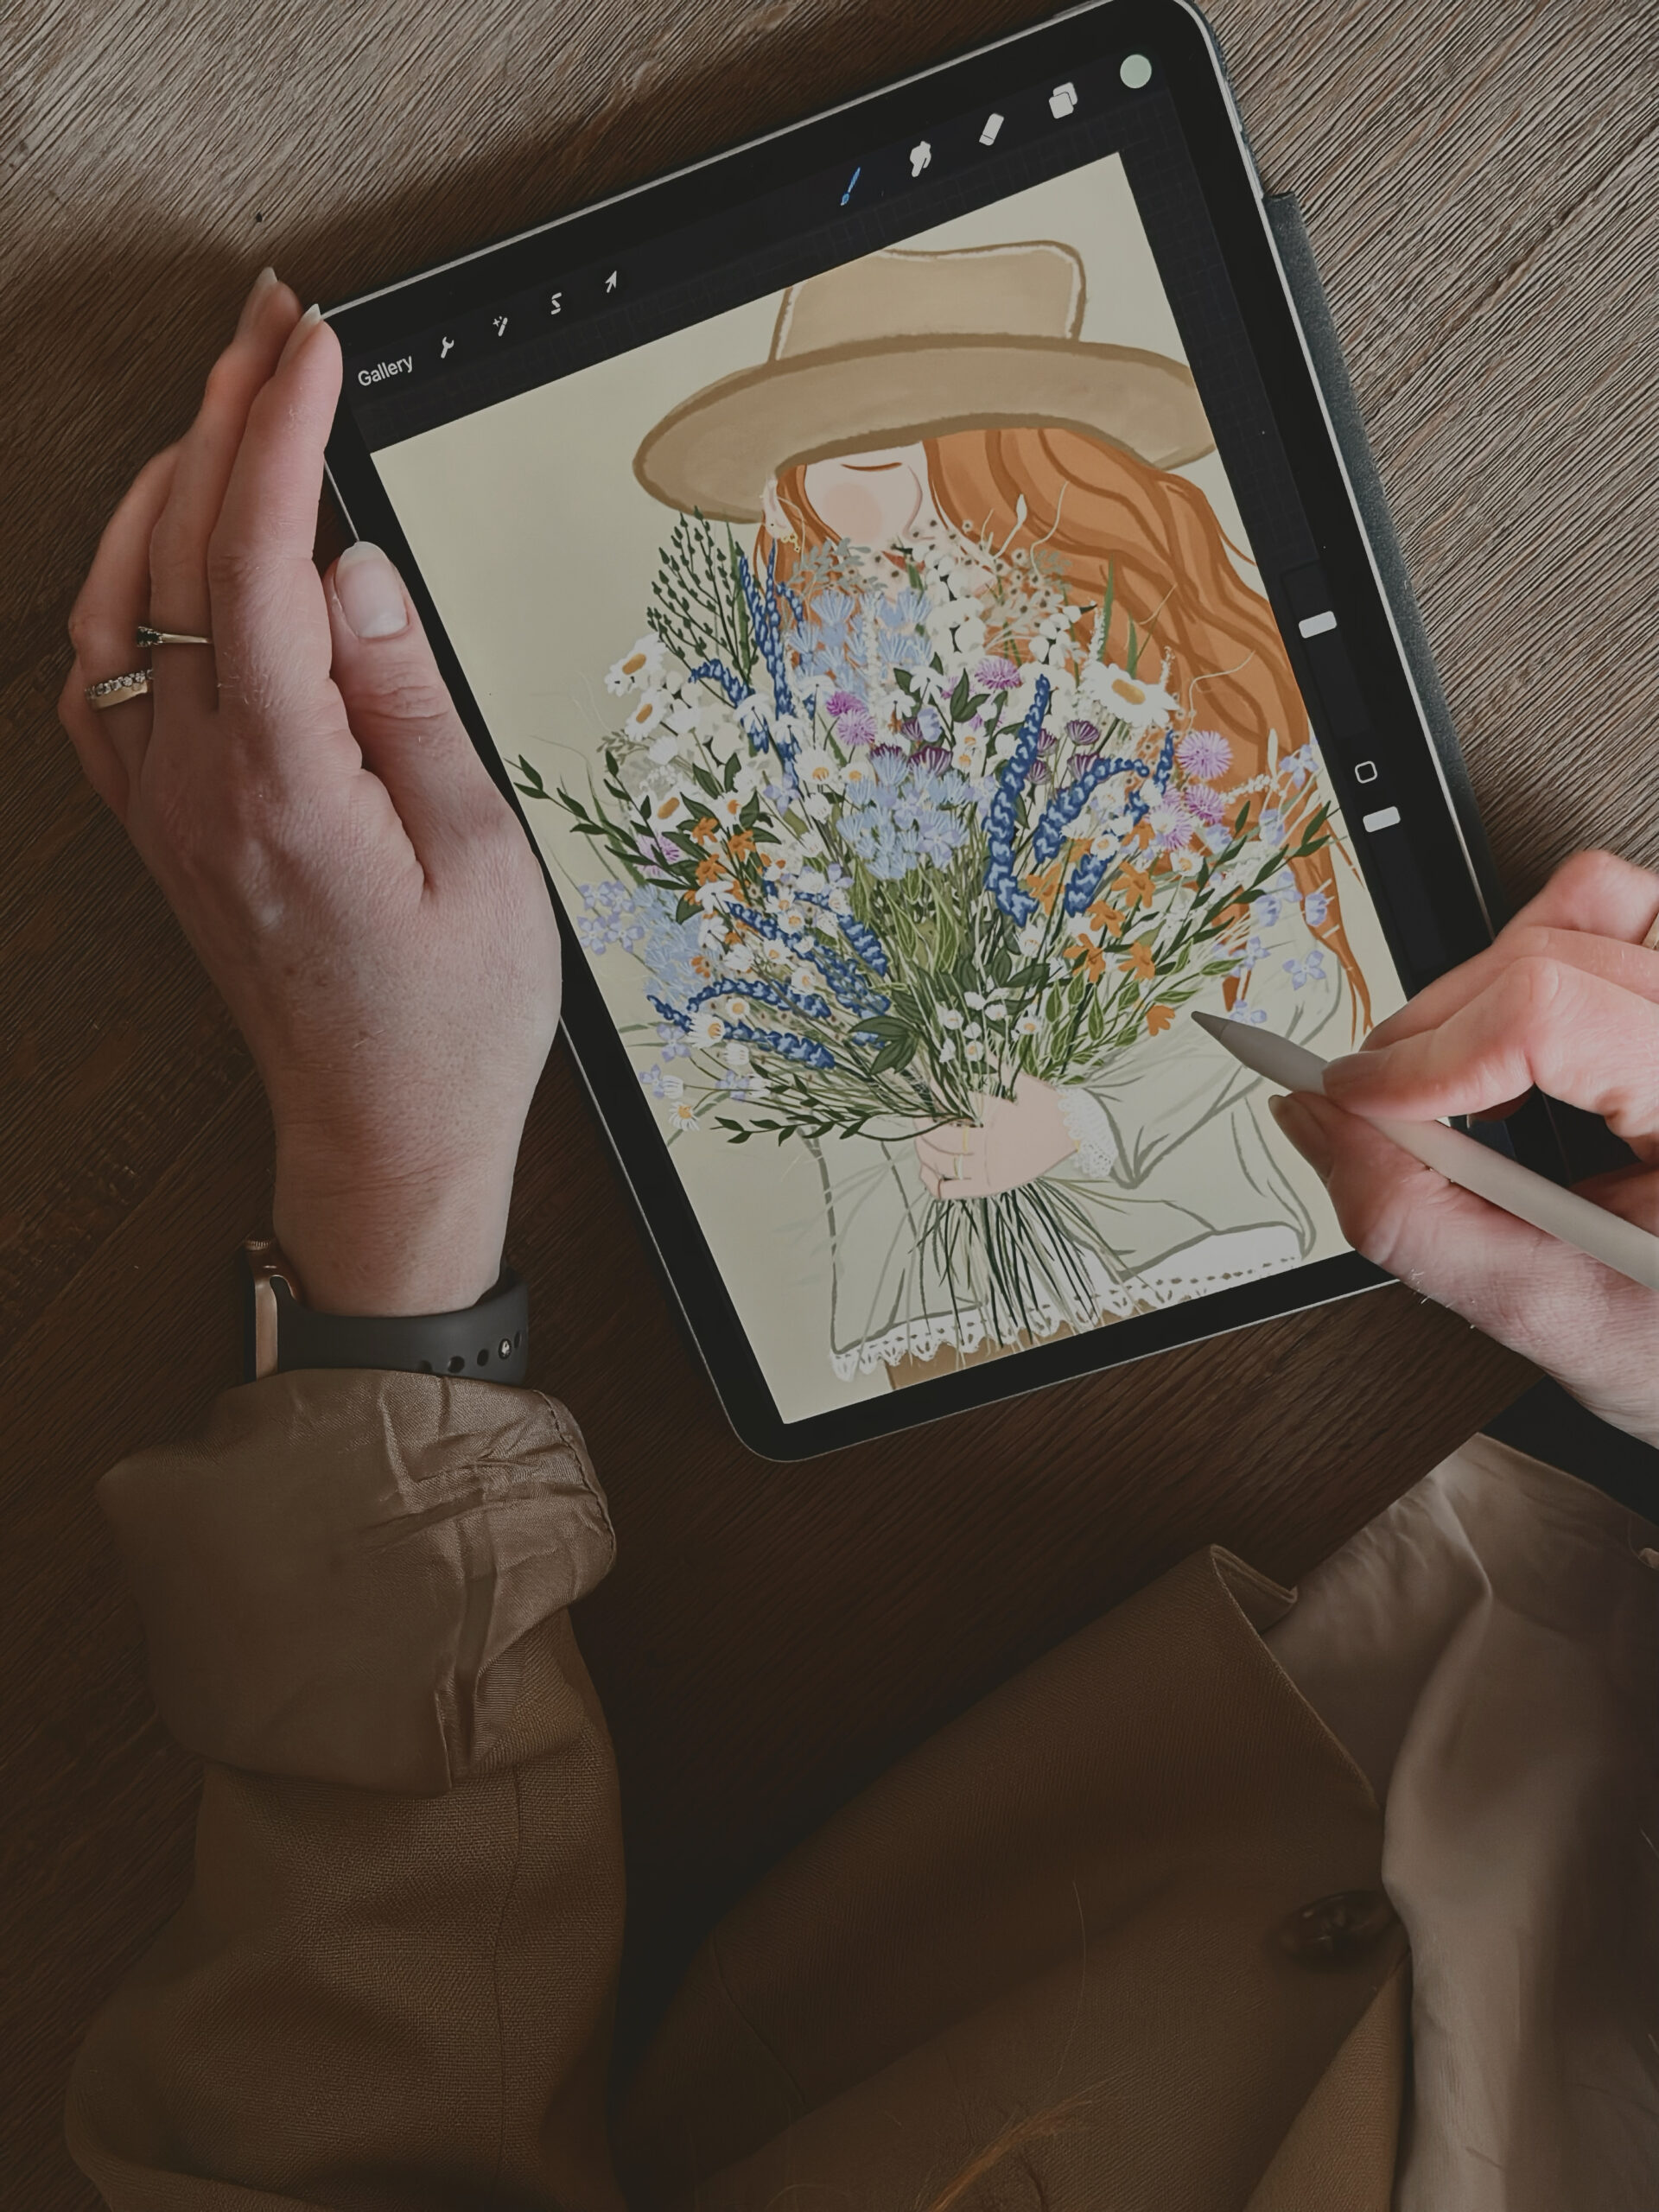 Nicolet Boon creating a new illustration of a girl with flowers